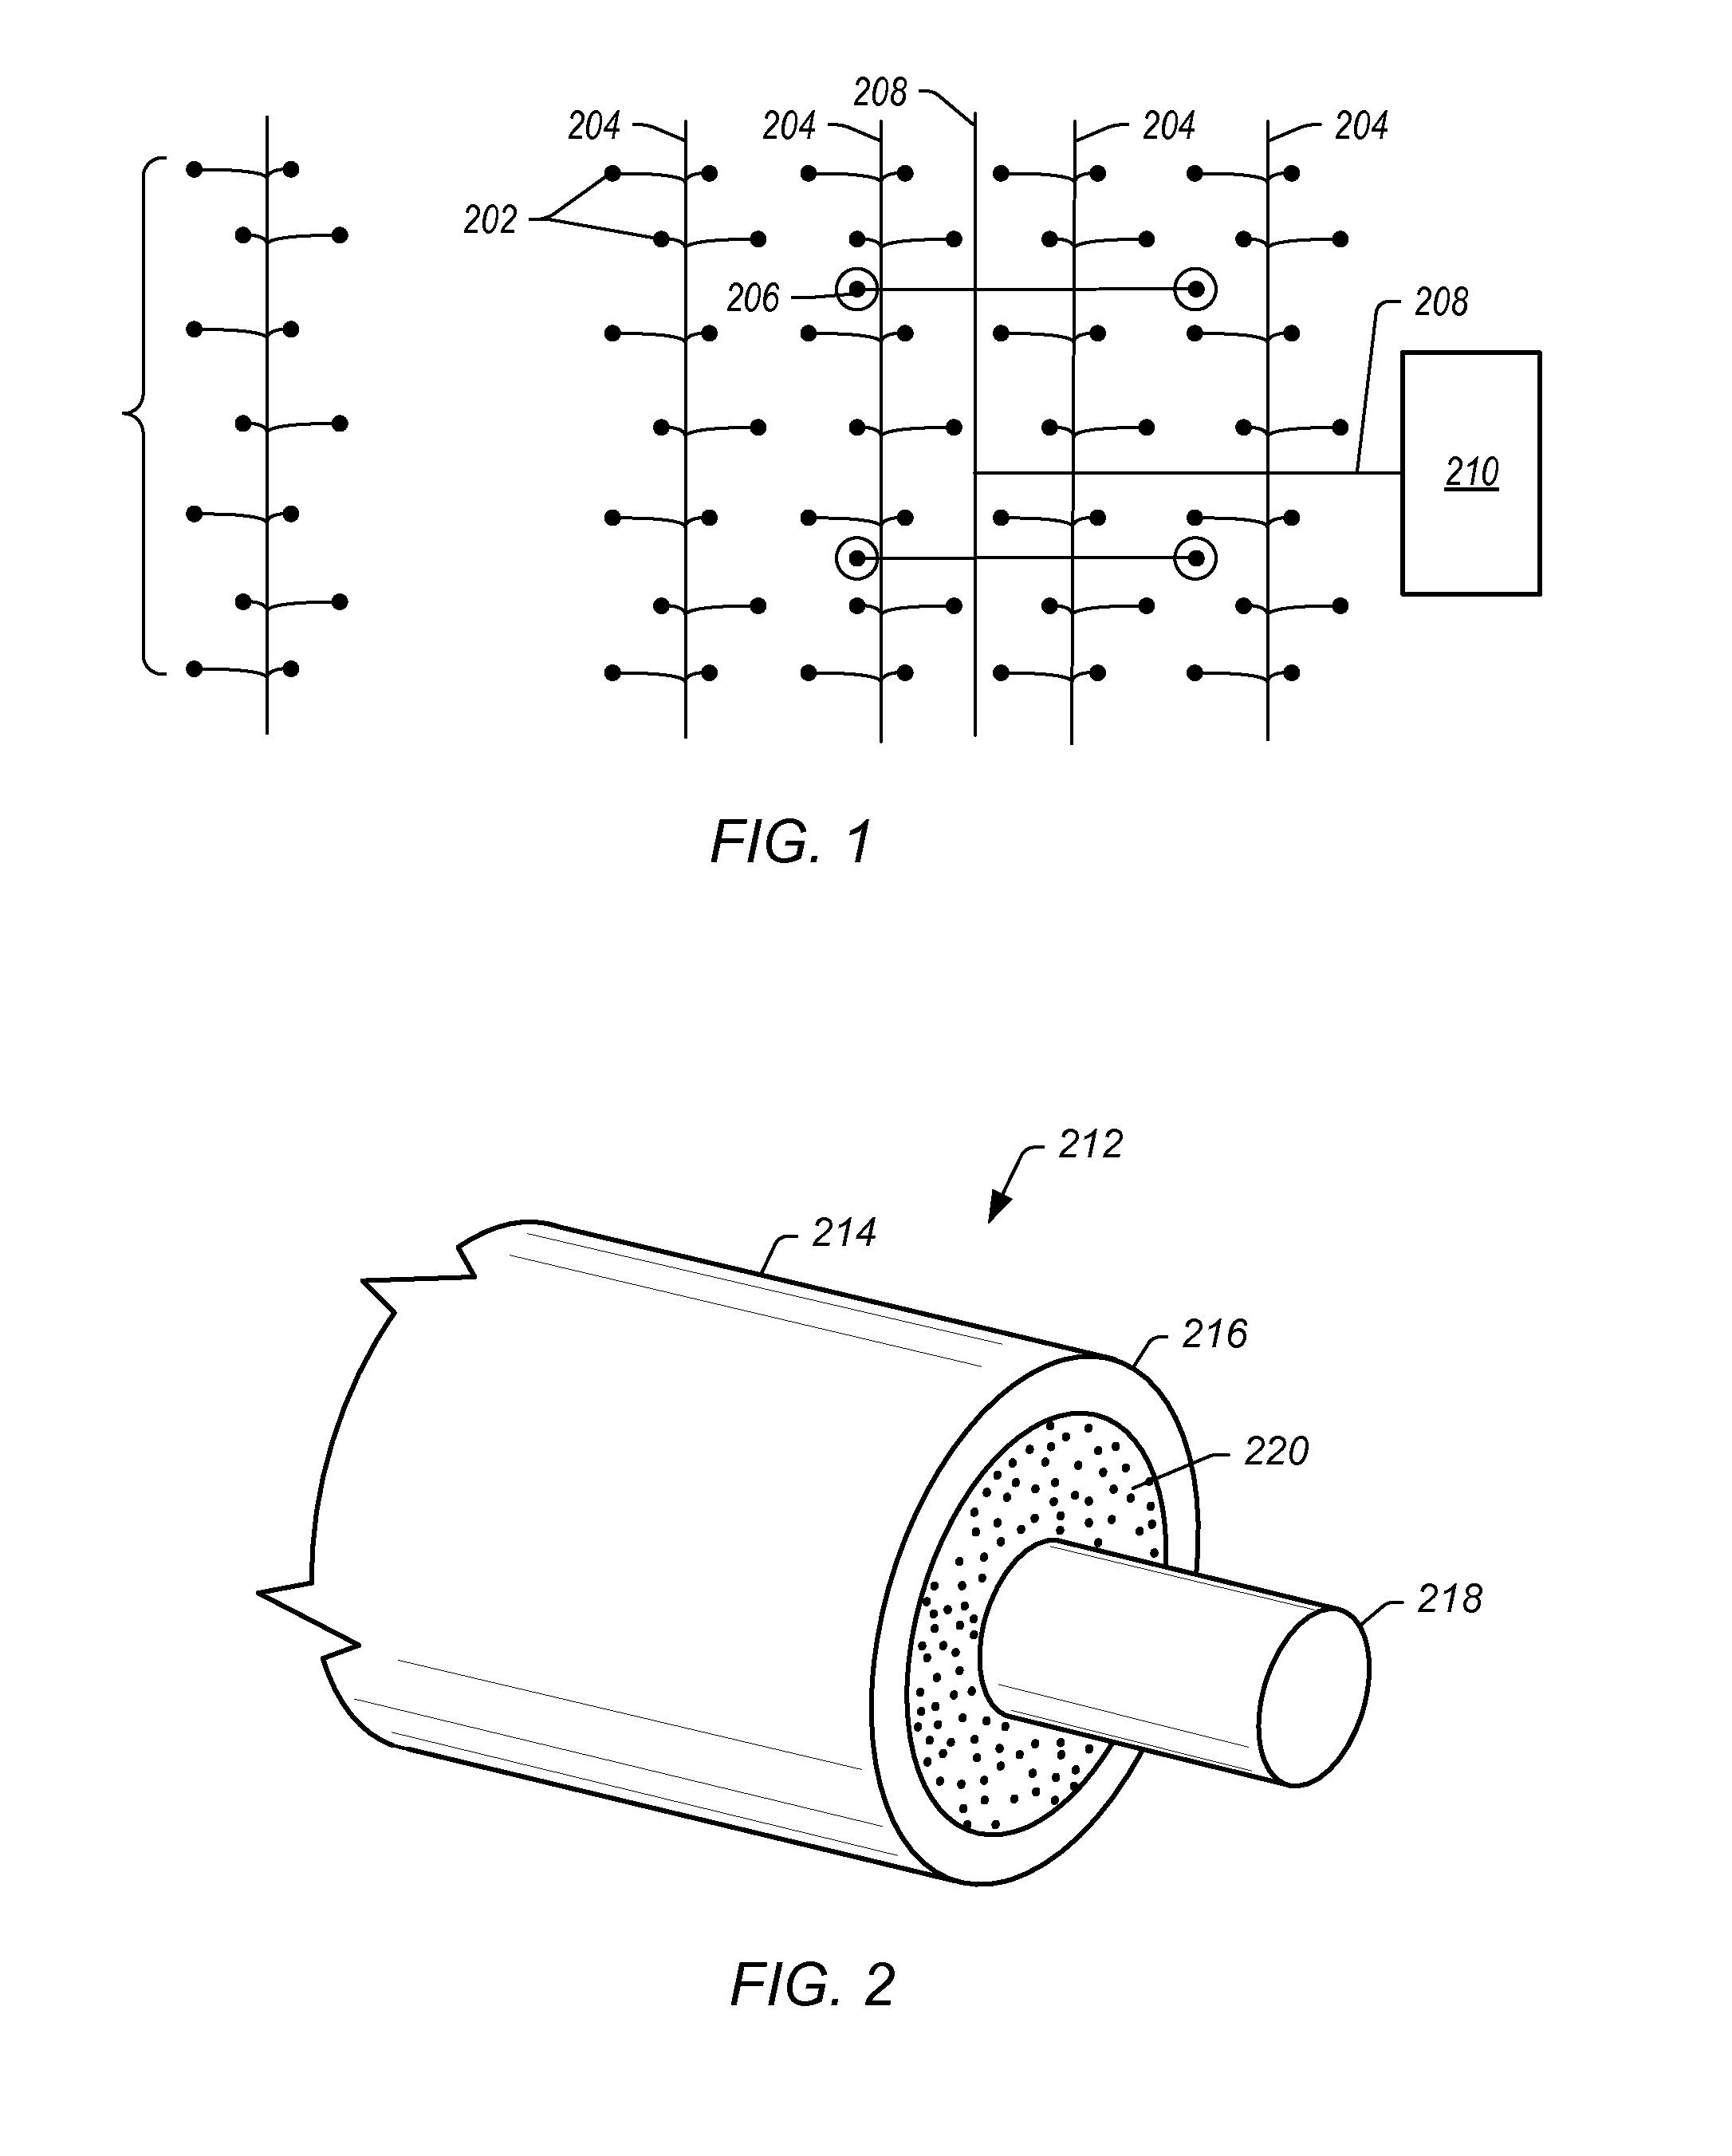 Treating hydrocarbon formations using hybrid in situ heat treatment and steam methods